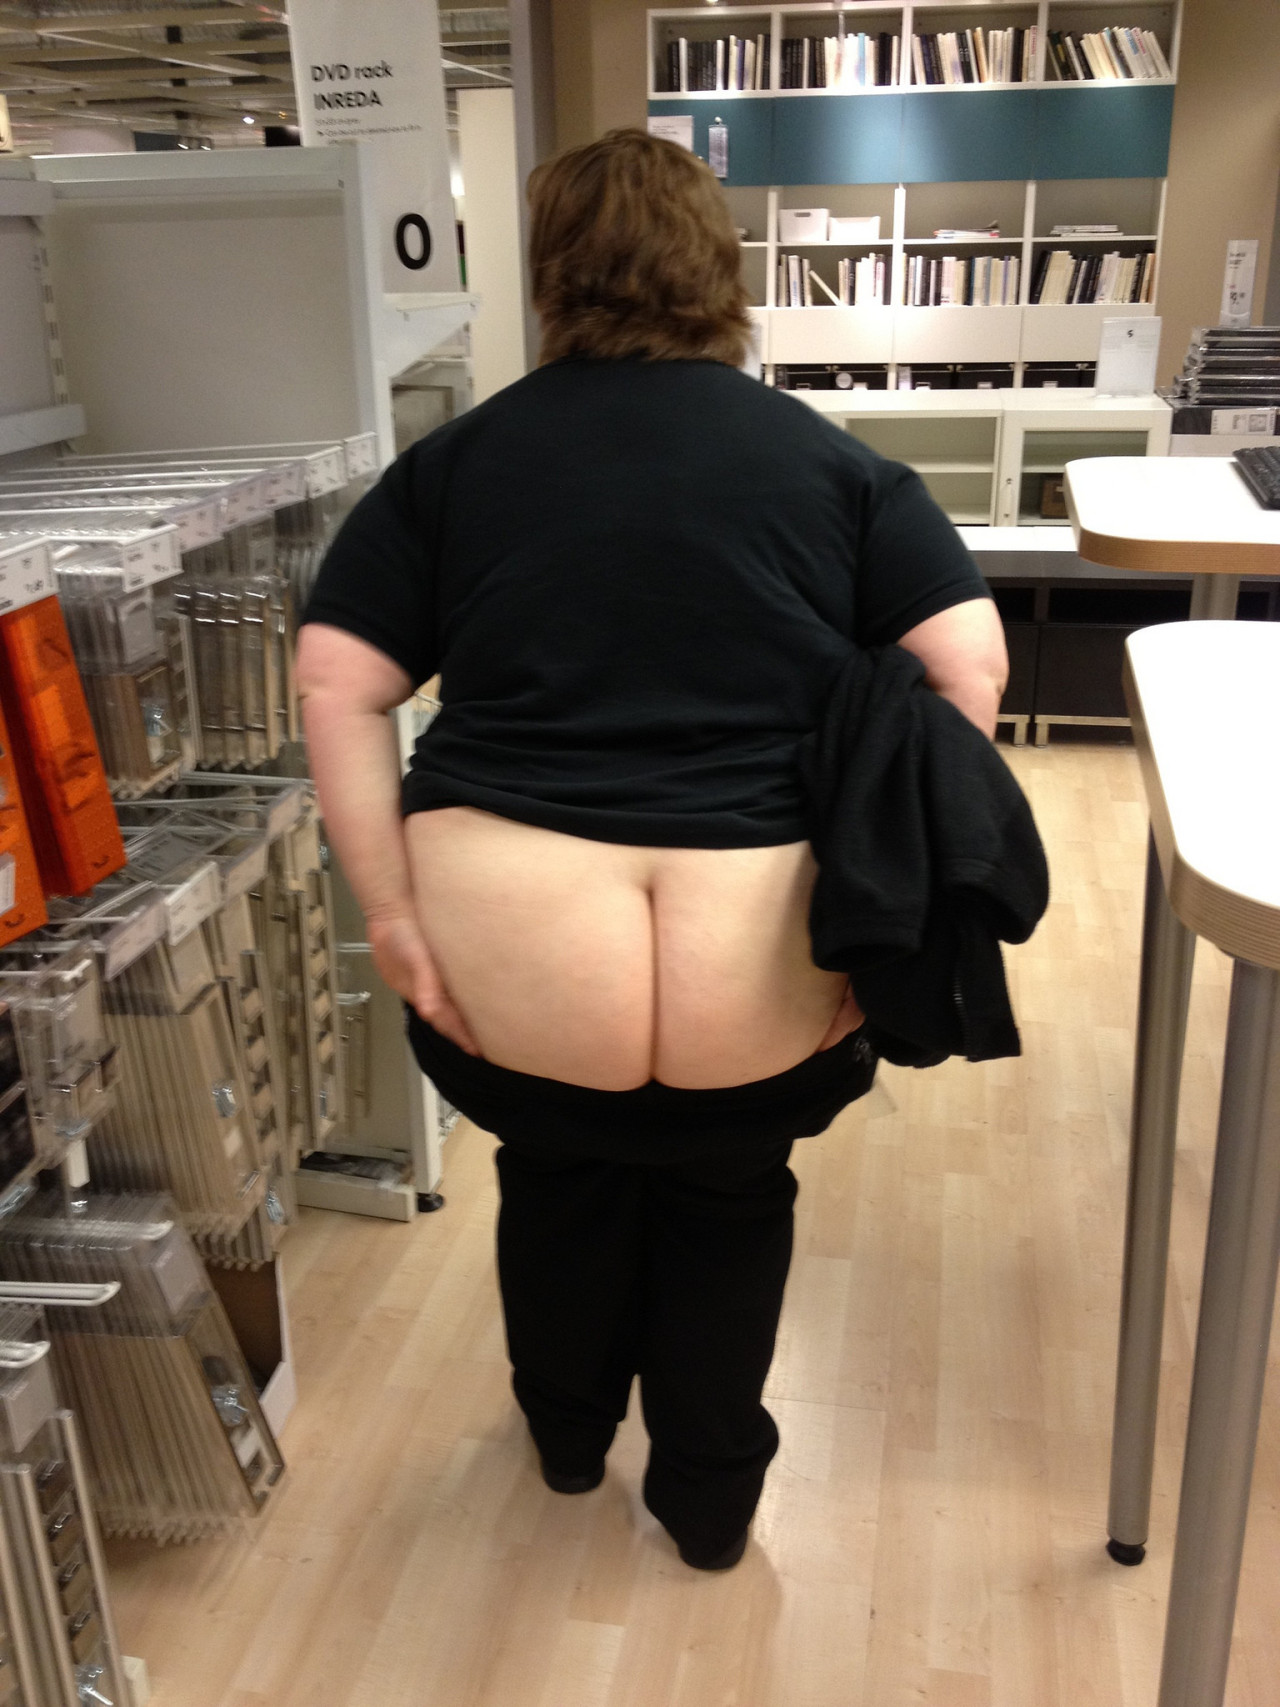 A cheeky show in Home Depot. I envy her hubby sooo much??&hellip;  Make money